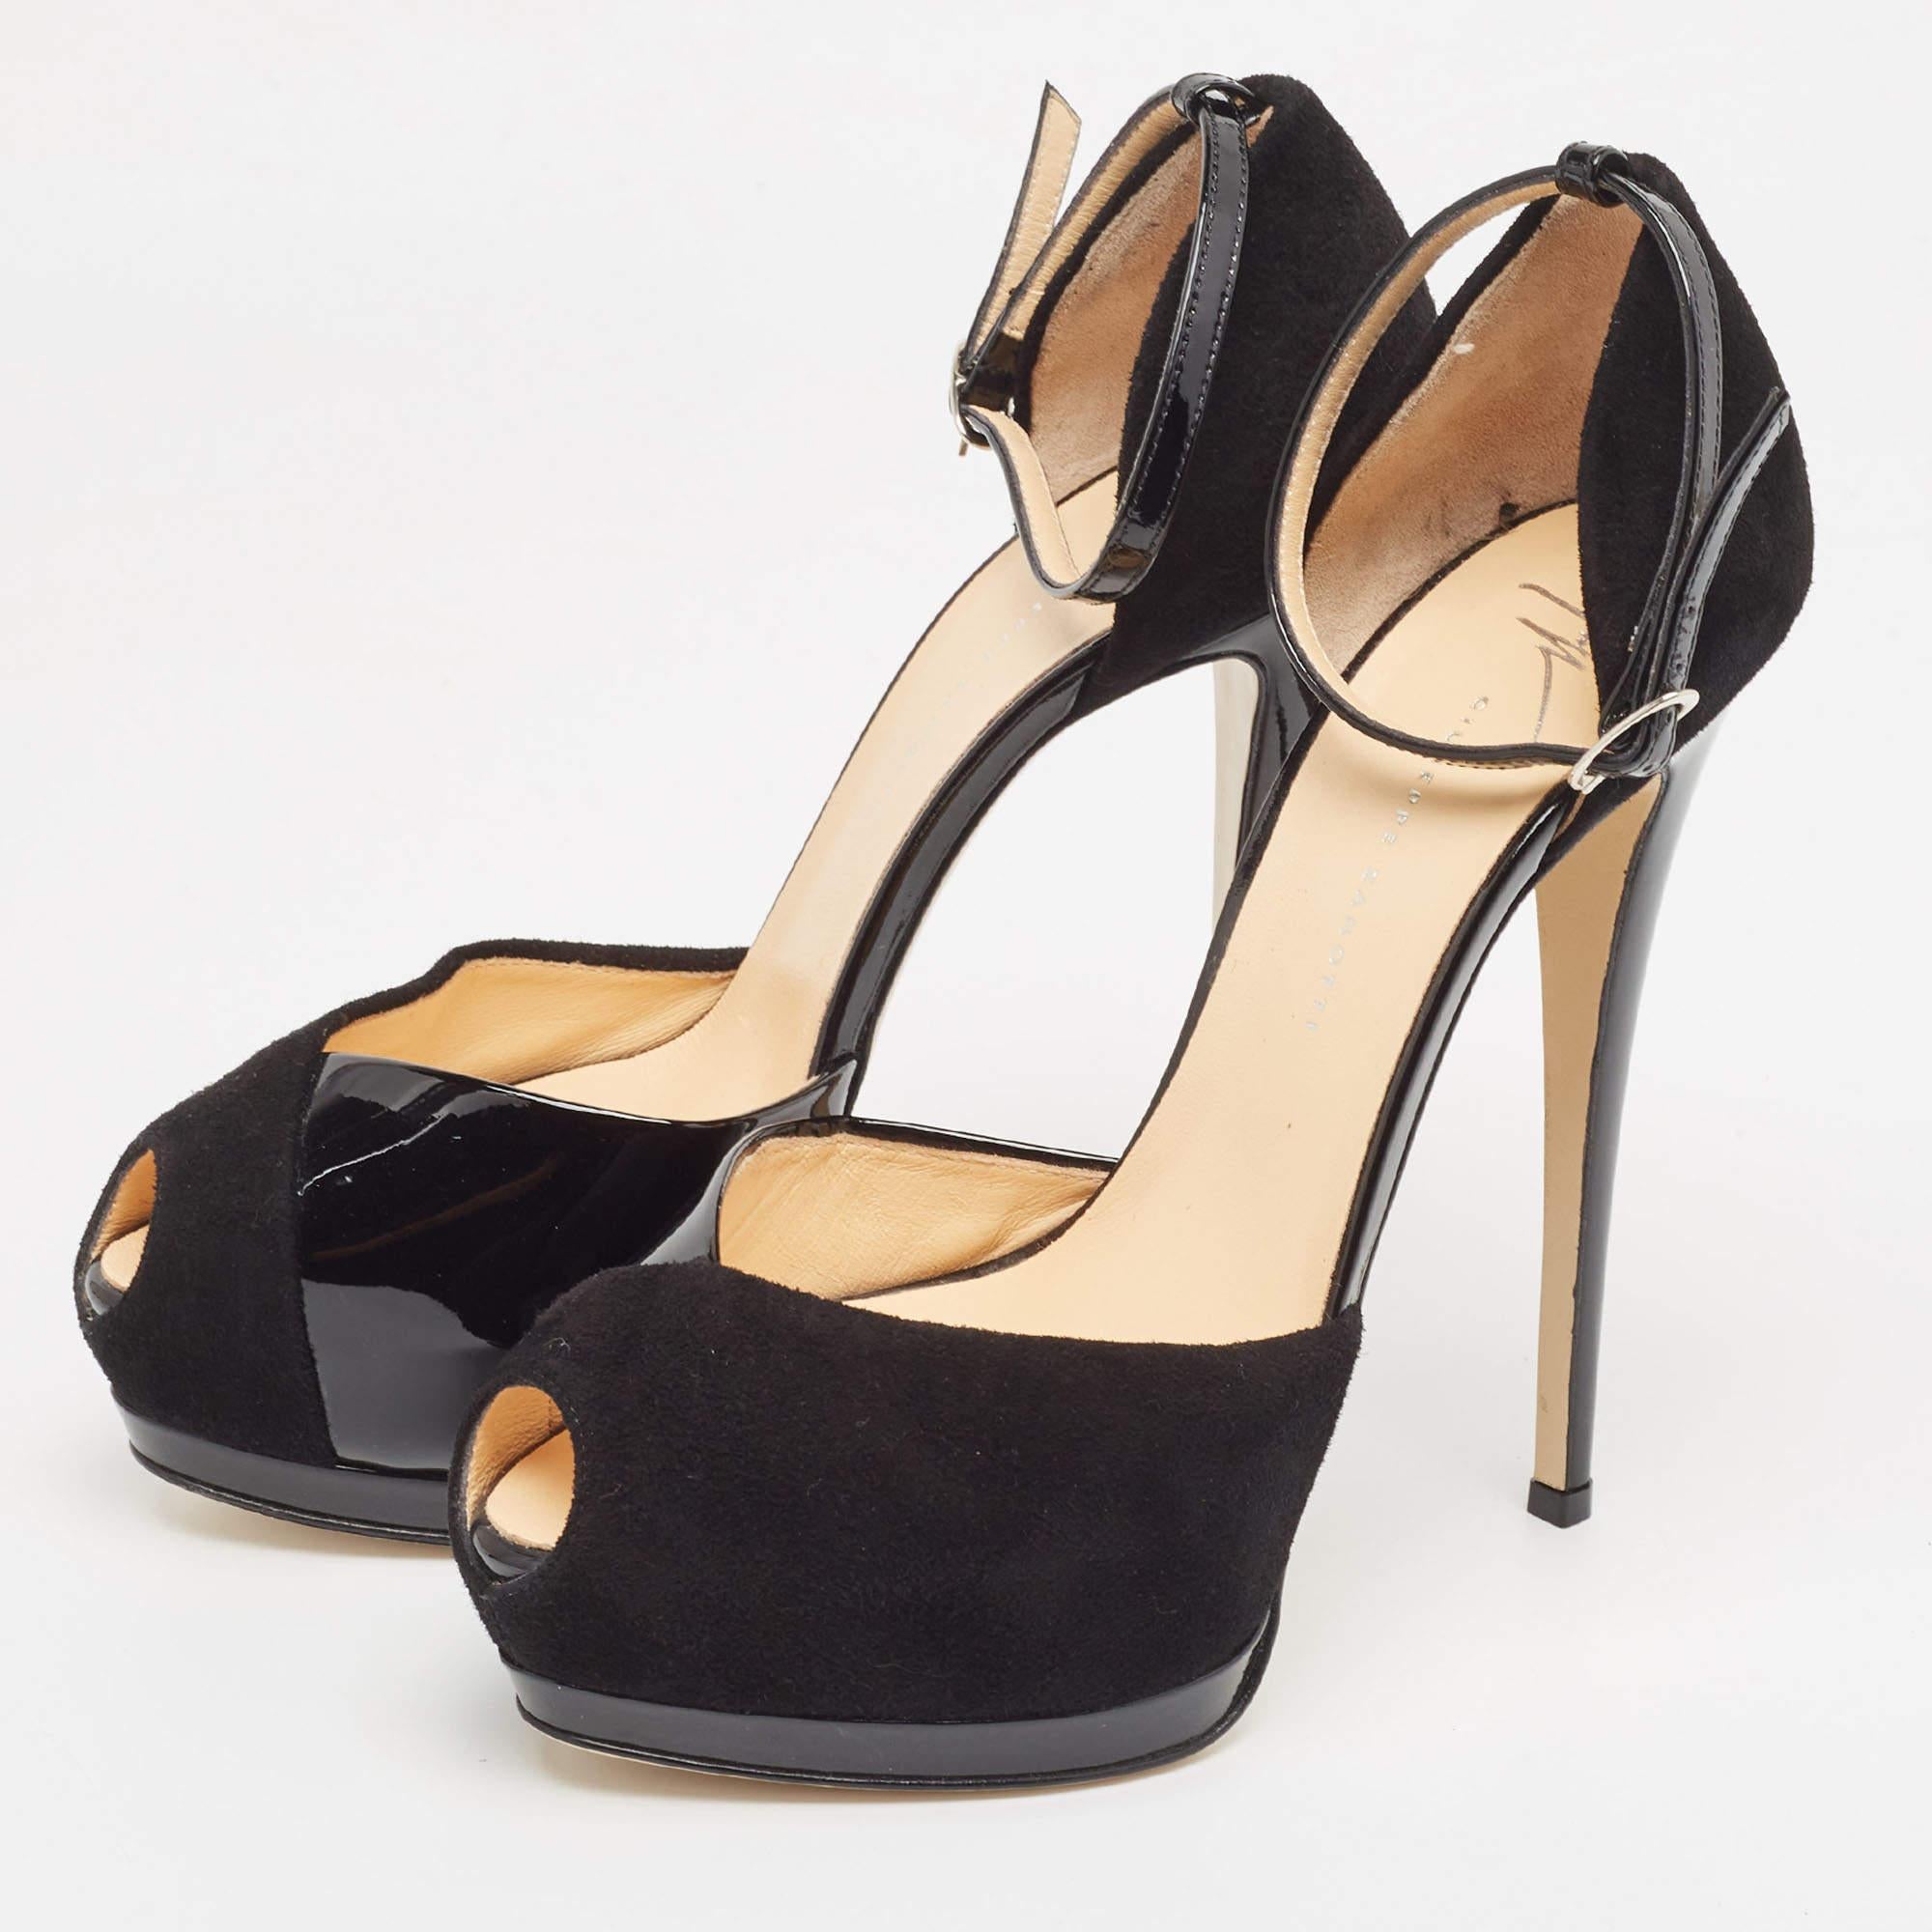 Giuseppe Zanotti Black Suede and Patent Peep Toe Ankle Strap Sandals Size 39 For Sale 4